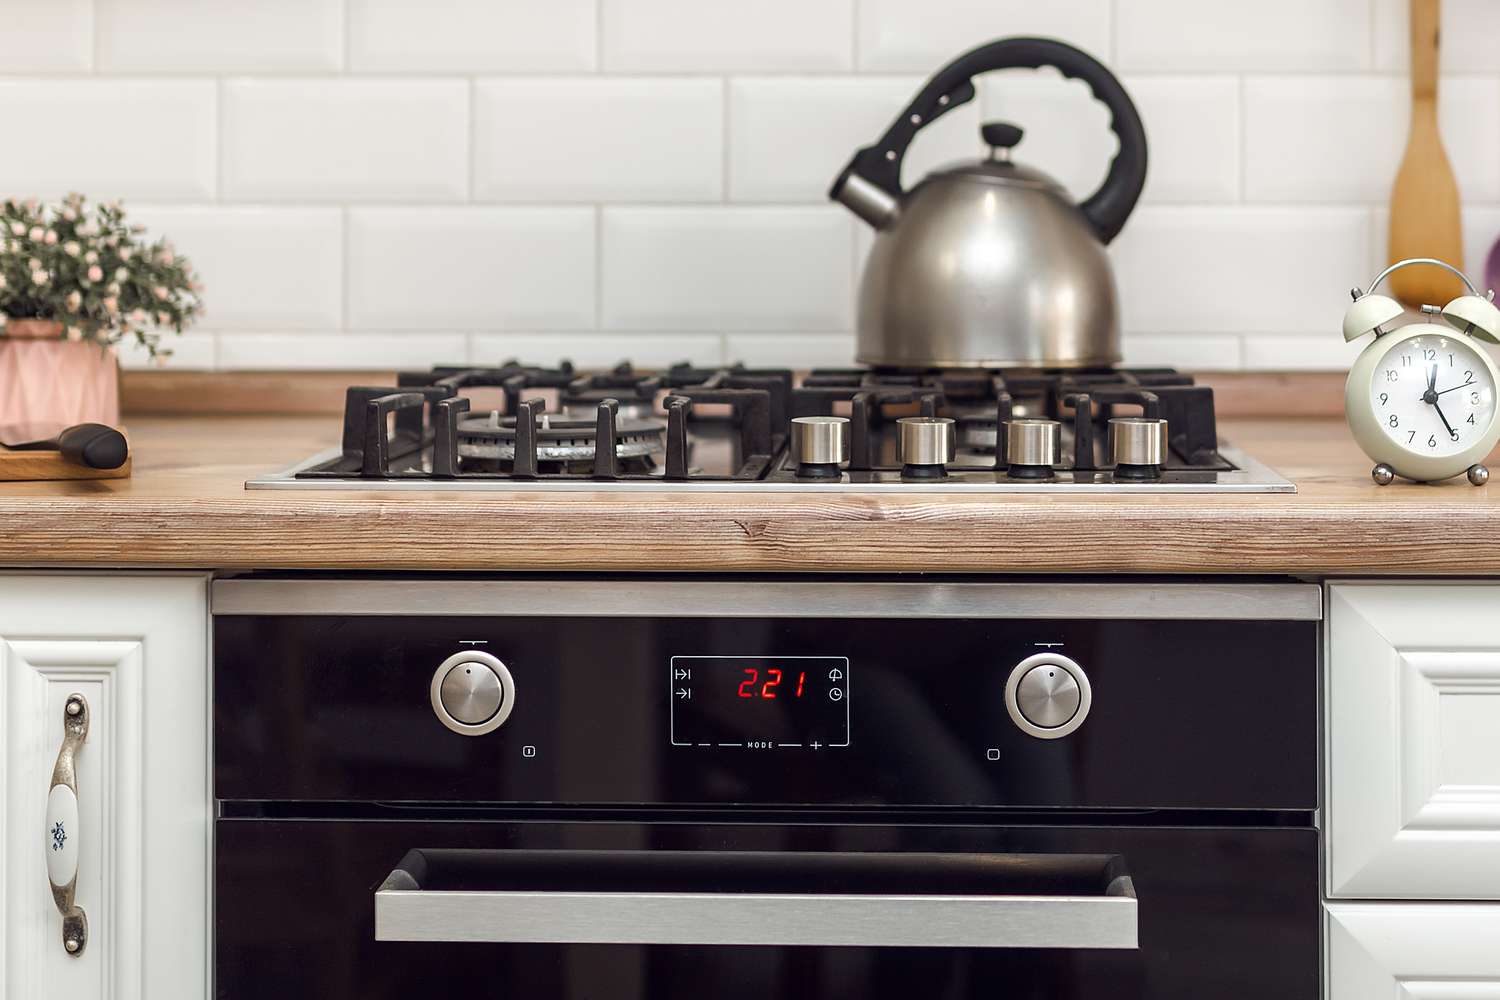 Can Self Cleaning Oven Kill You: Demystifying the Oven Safety Saga